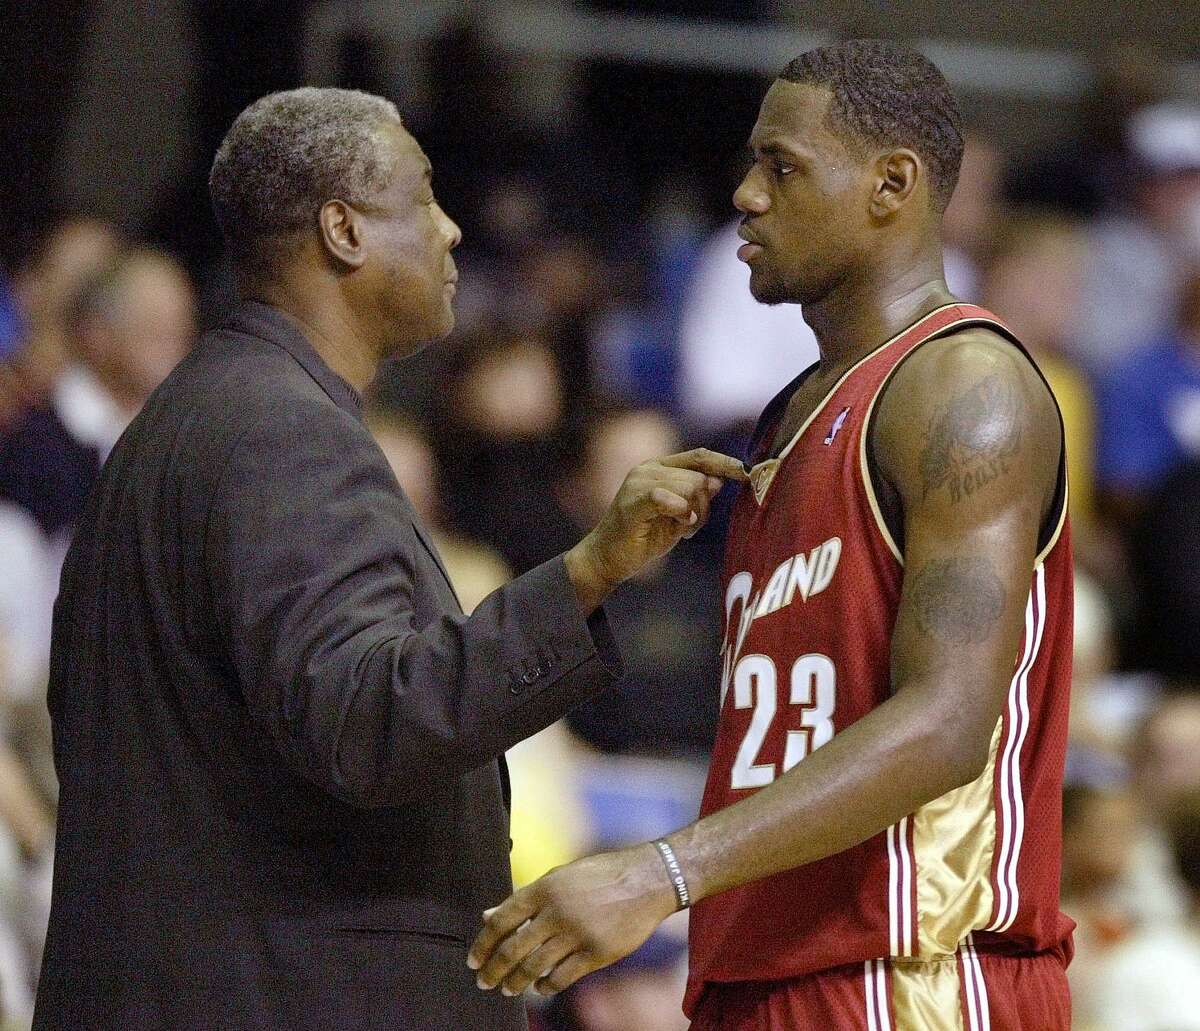 Cleveland Cavaliers' head coach Paul Silas, left, talks with LeBron James, right, during their game against the Atlanta Hawks in Asheville, N.C., Wednesday, Oct. 8, 2003. (AP Photo/Chuck Burton) HOUCHRON CAPTION (10/09/2003 - 2-STAR): Cavs coach Paul Silas talks to LeBron James during Wednesday's game with Atlanta.